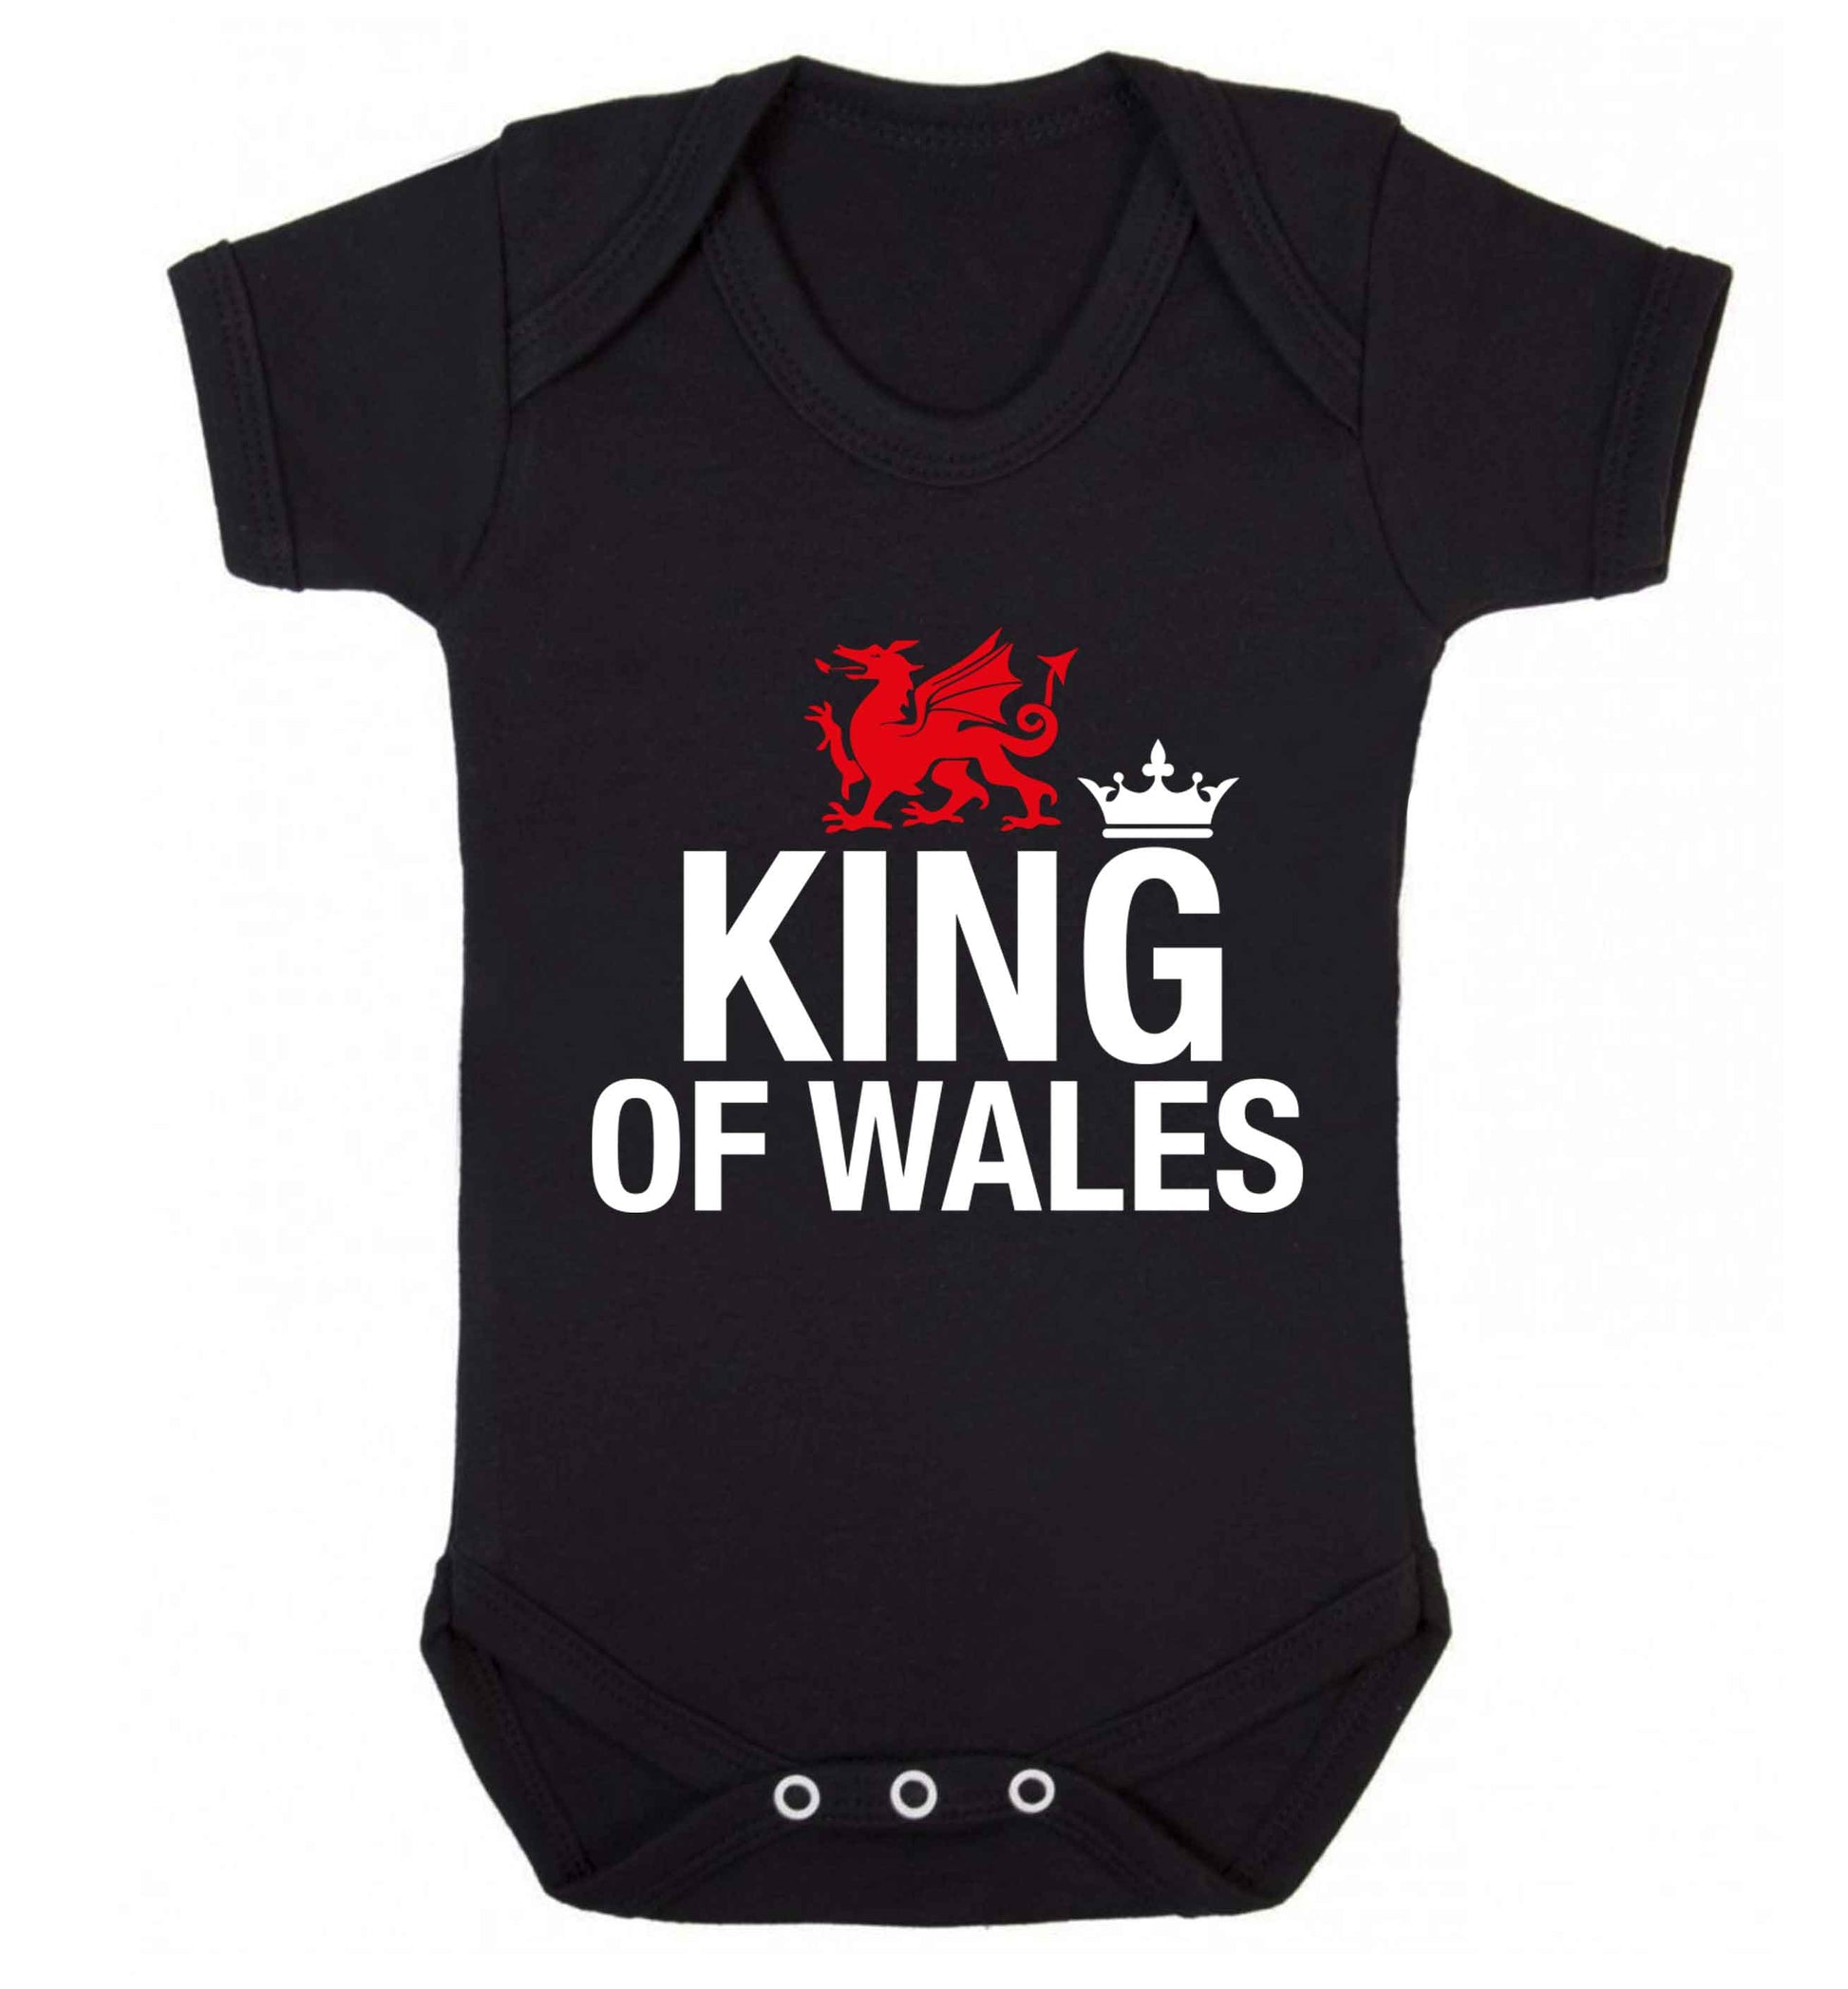 King of Wales Baby Vest black 18-24 months